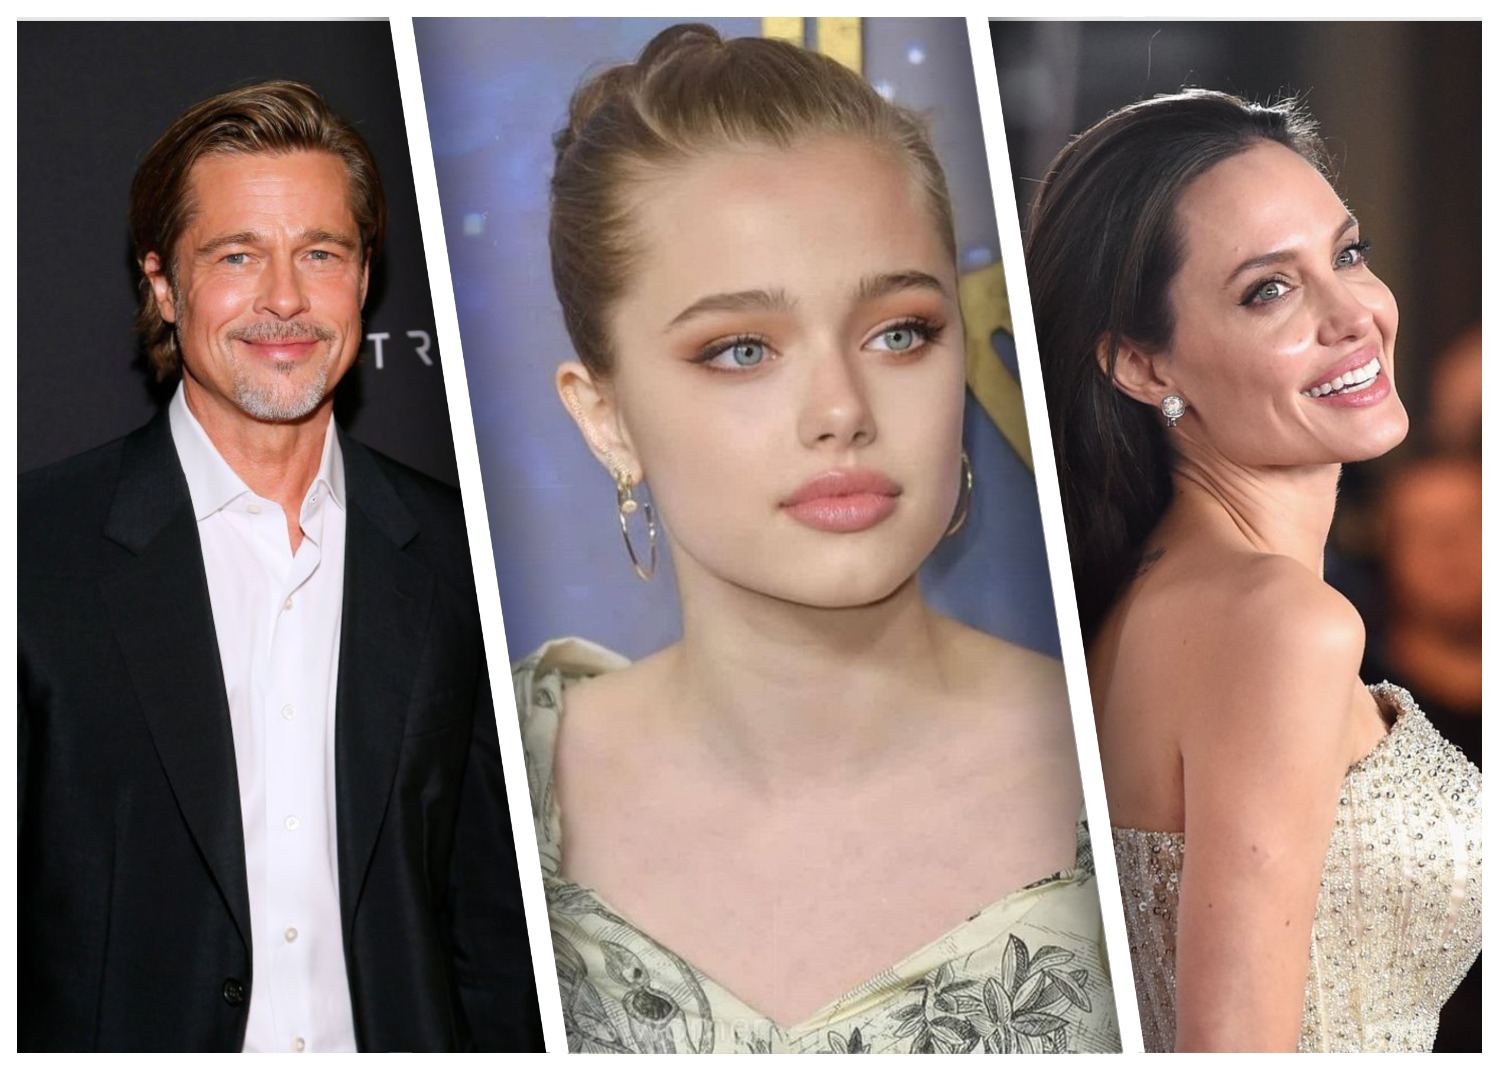 Brad Pitt and Angelina Jolie are beaming with pride over their daughter Shiloh Jolie-Pitt